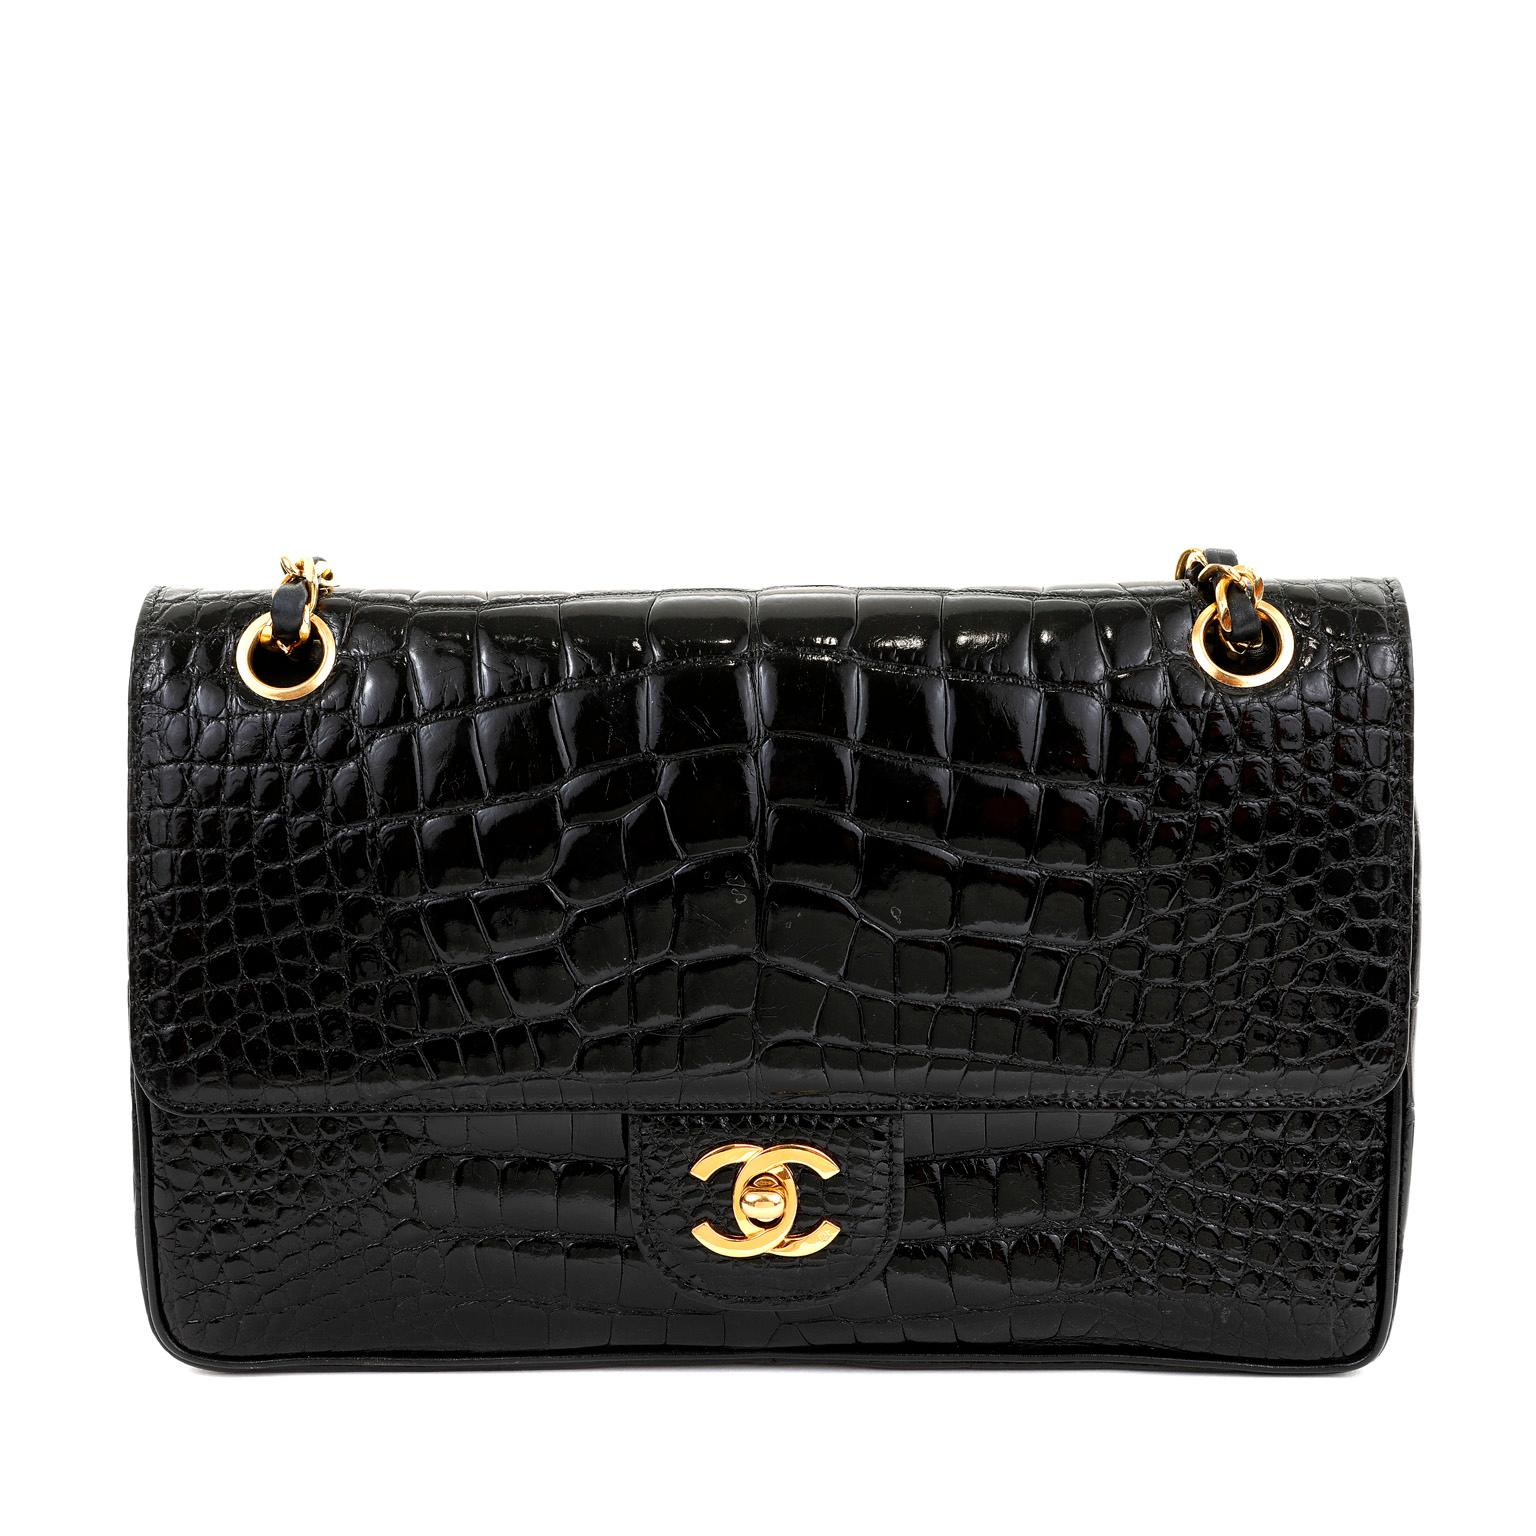 This authentic Chanel Black Crocodile Medium Classic Flap is in pristine condition.  No longer producing exotics, Chanel's remarkable crocodile Classic is extremely rare and collectible. 

Sleek black crocodile skin with gold tone interlocking CC